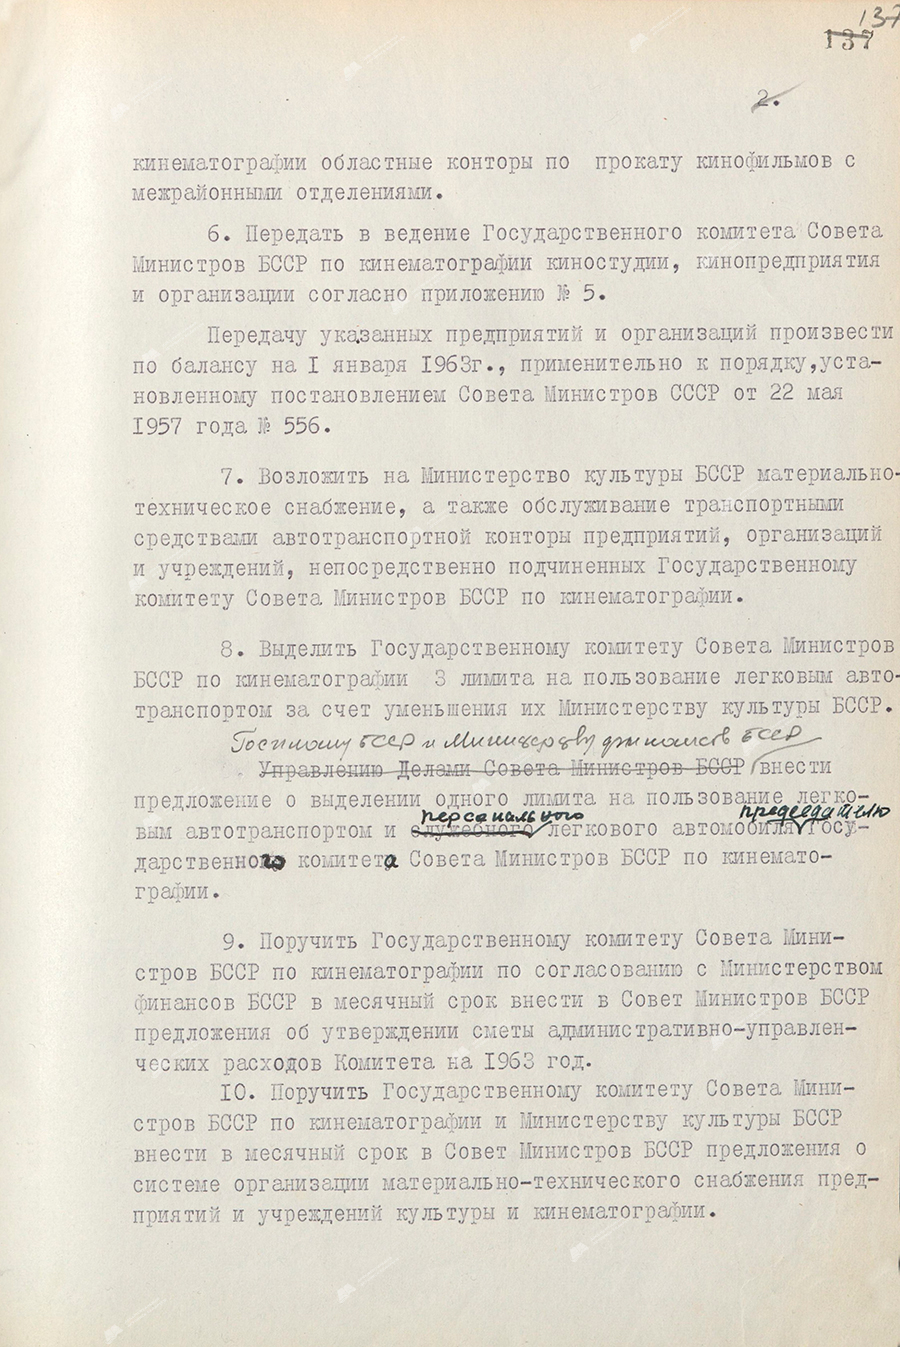 Resolution No. 383 of the Council of Ministers of the BSSR «Issues of the organization of the State Committee of the Council of Ministers of the BSSR on Cinematography»-стр. 1